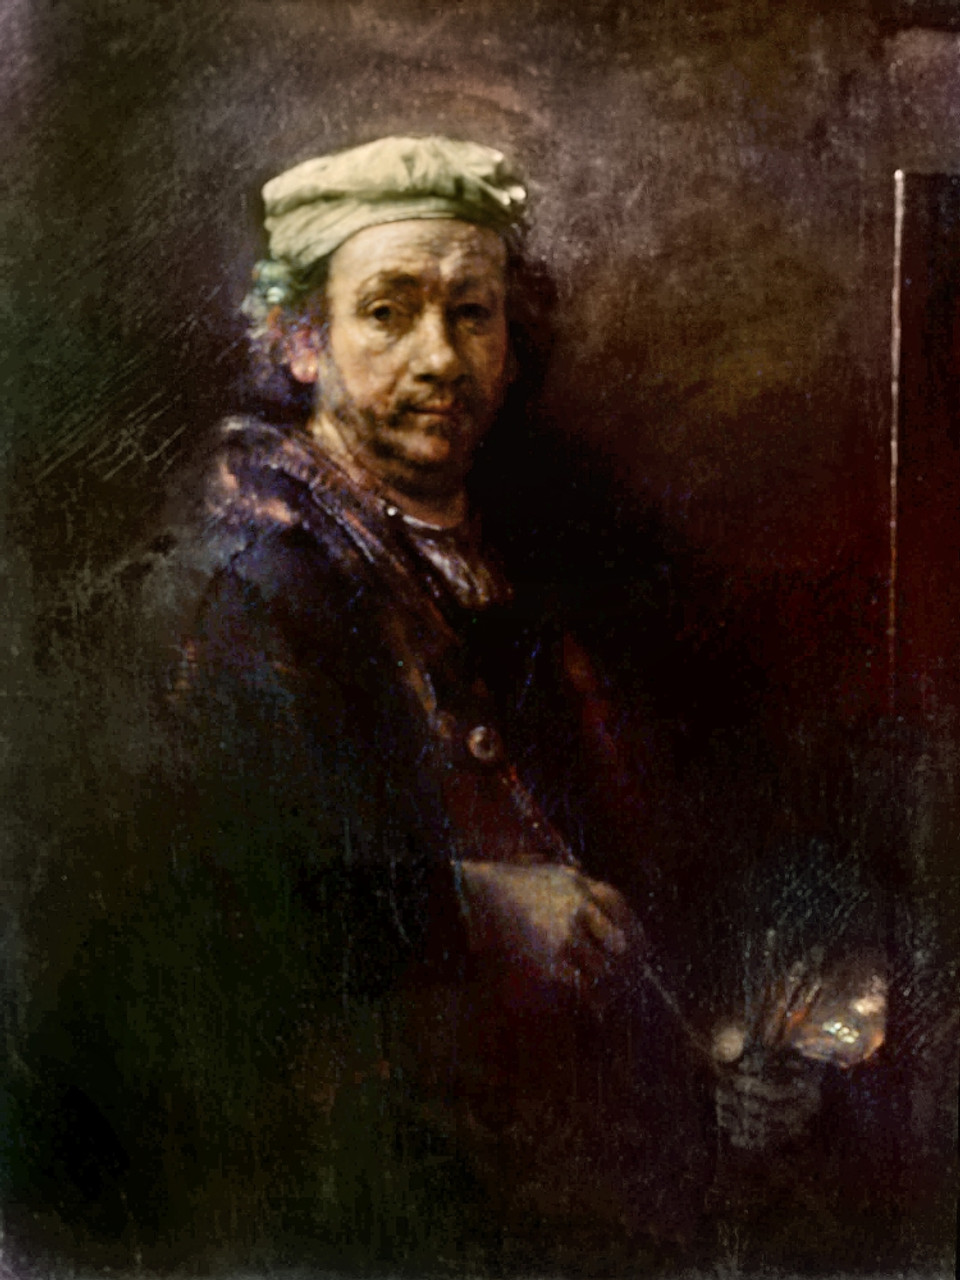 - Self-Portrait. Print - Rembrandt Collection VARGRC0054419 /Nself-Portrait By Easel. On Poster Oil Item His Posterazzi Rijn, Rembrandt: 1660. # Van Canvas by At Granger